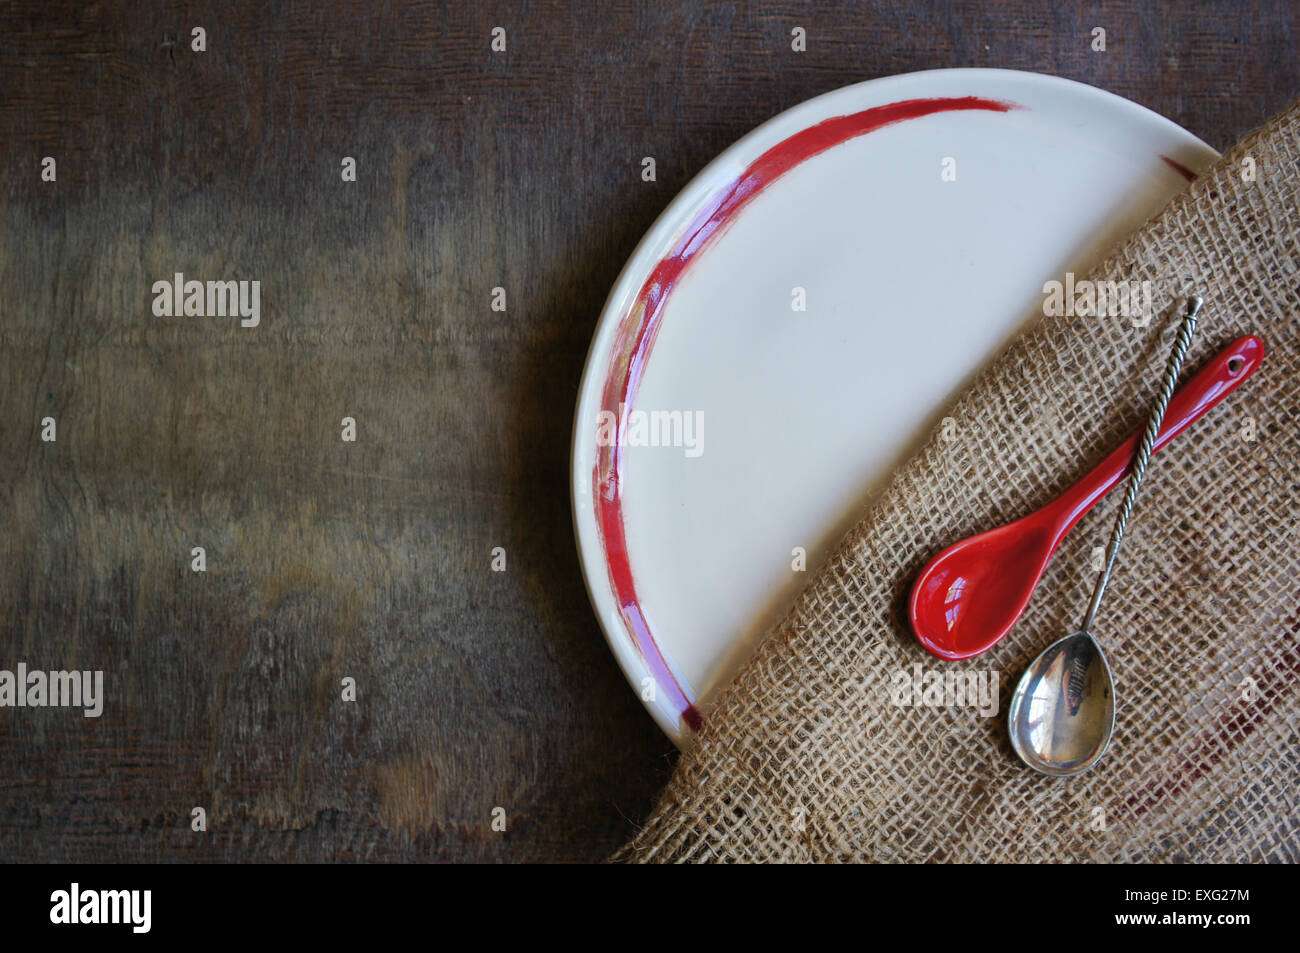 Plate and silverware on the old wooden table with burlap and napkin Stock Photo